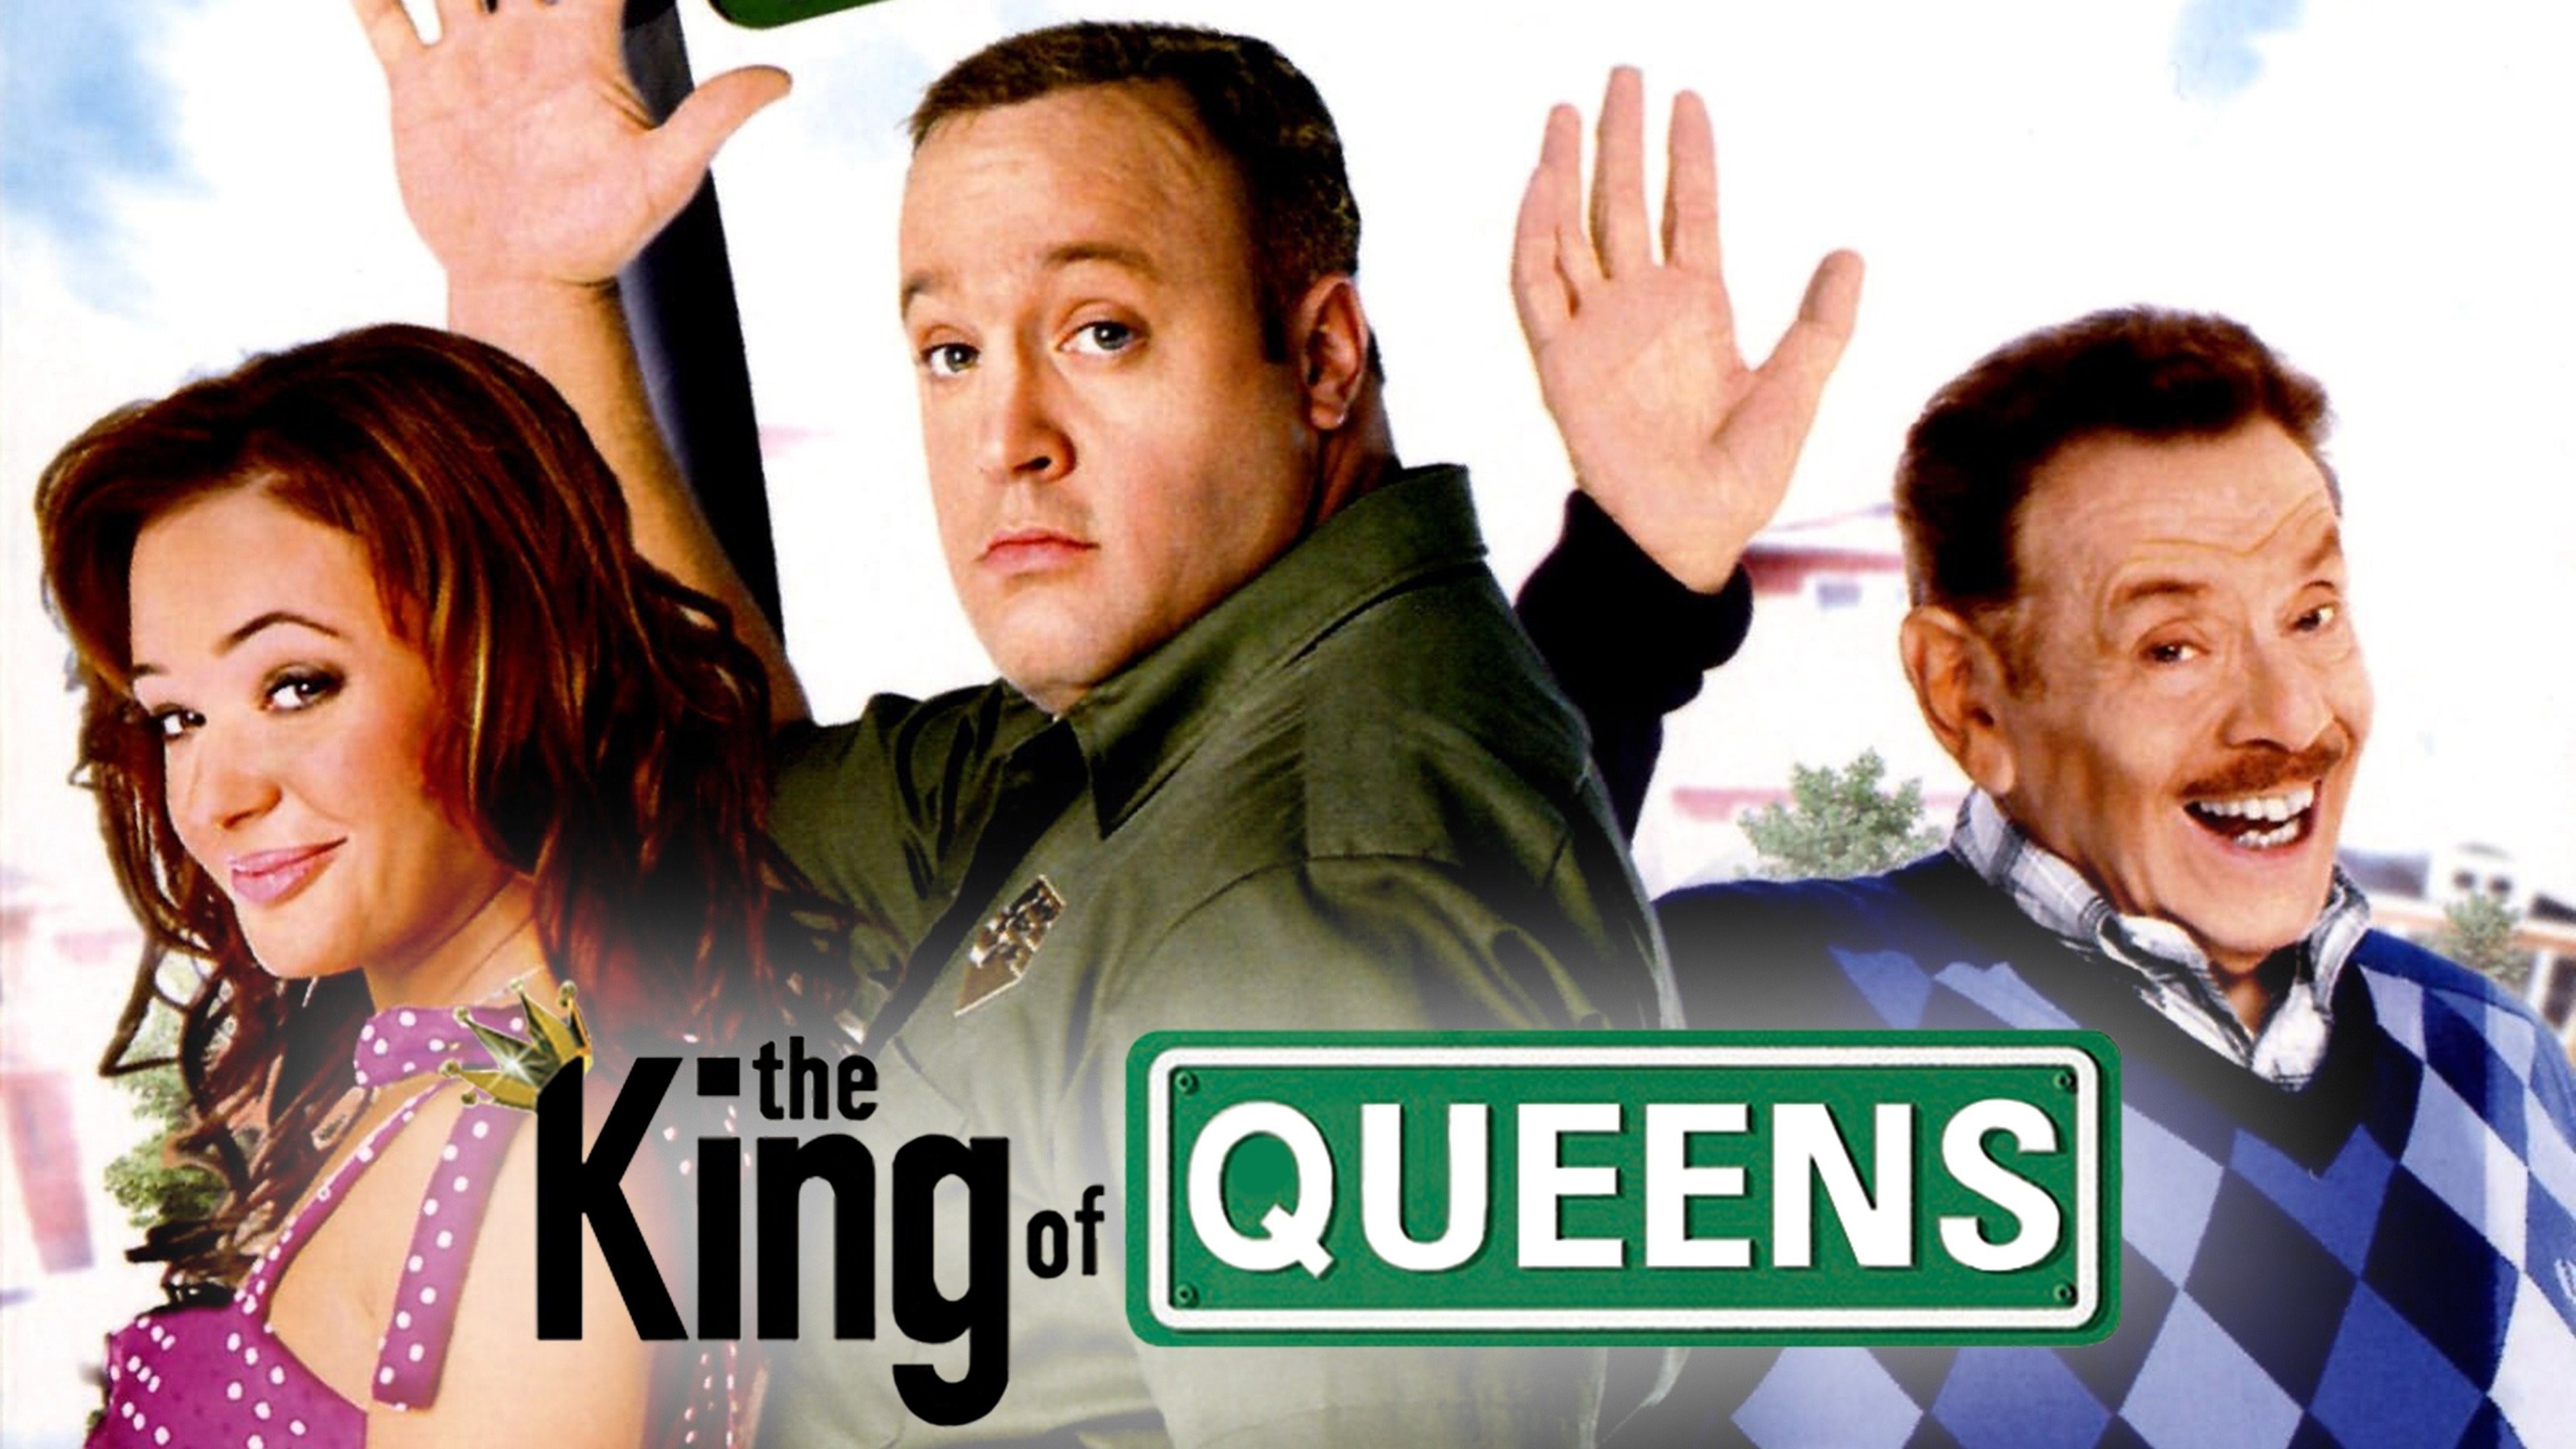 Doug's Secret Woman, The King of Queens, Leah Remini, Kevin James, king  queens 